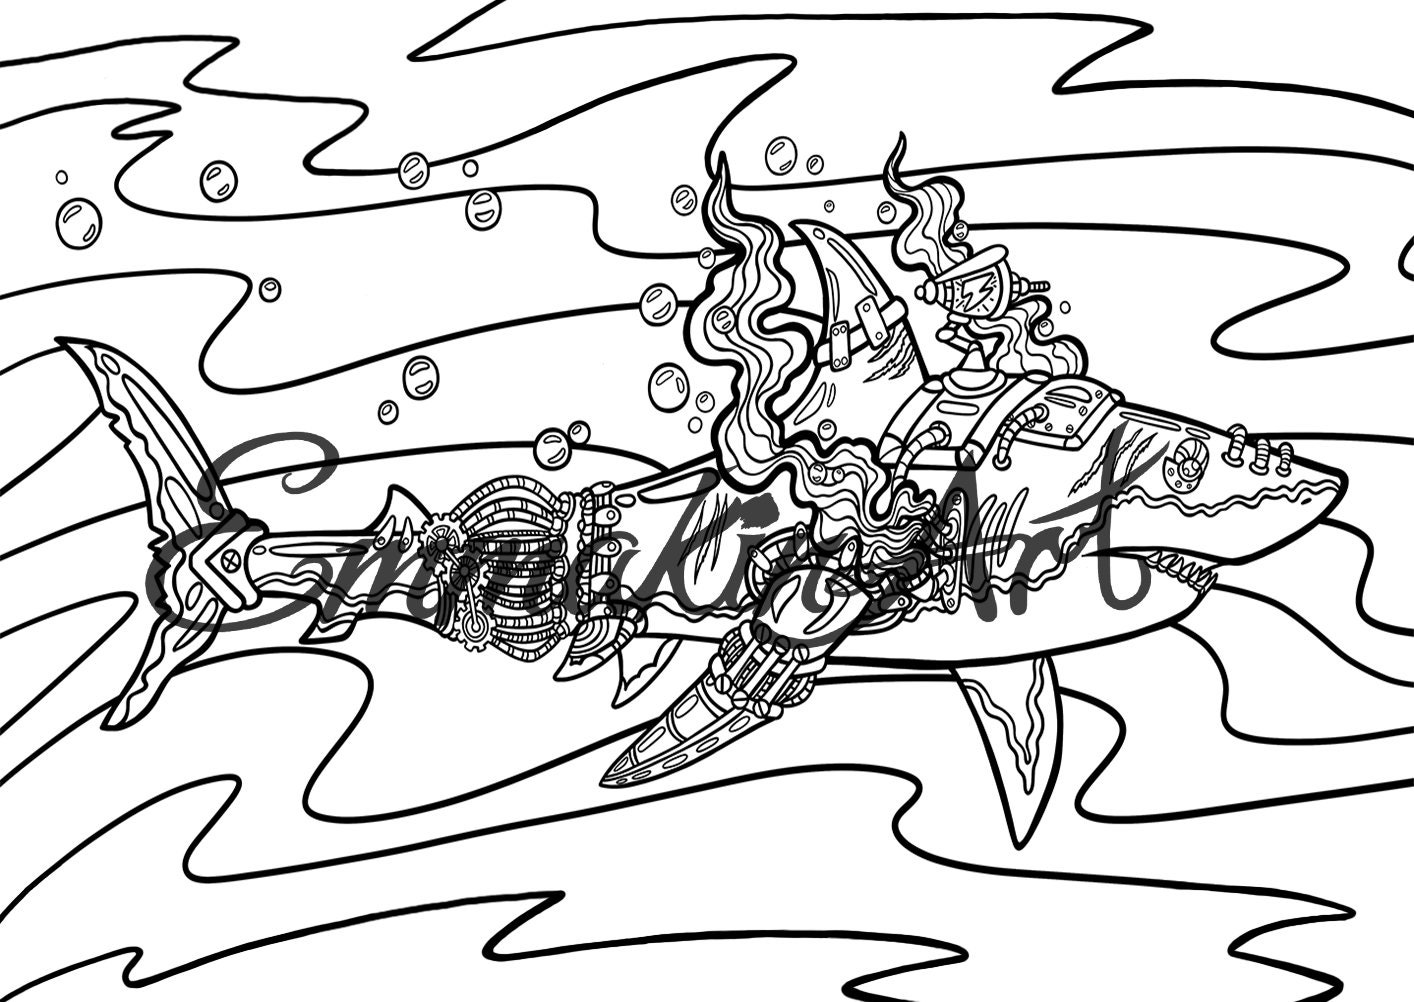 Steampunk shark coloring page for adults digital download instant download